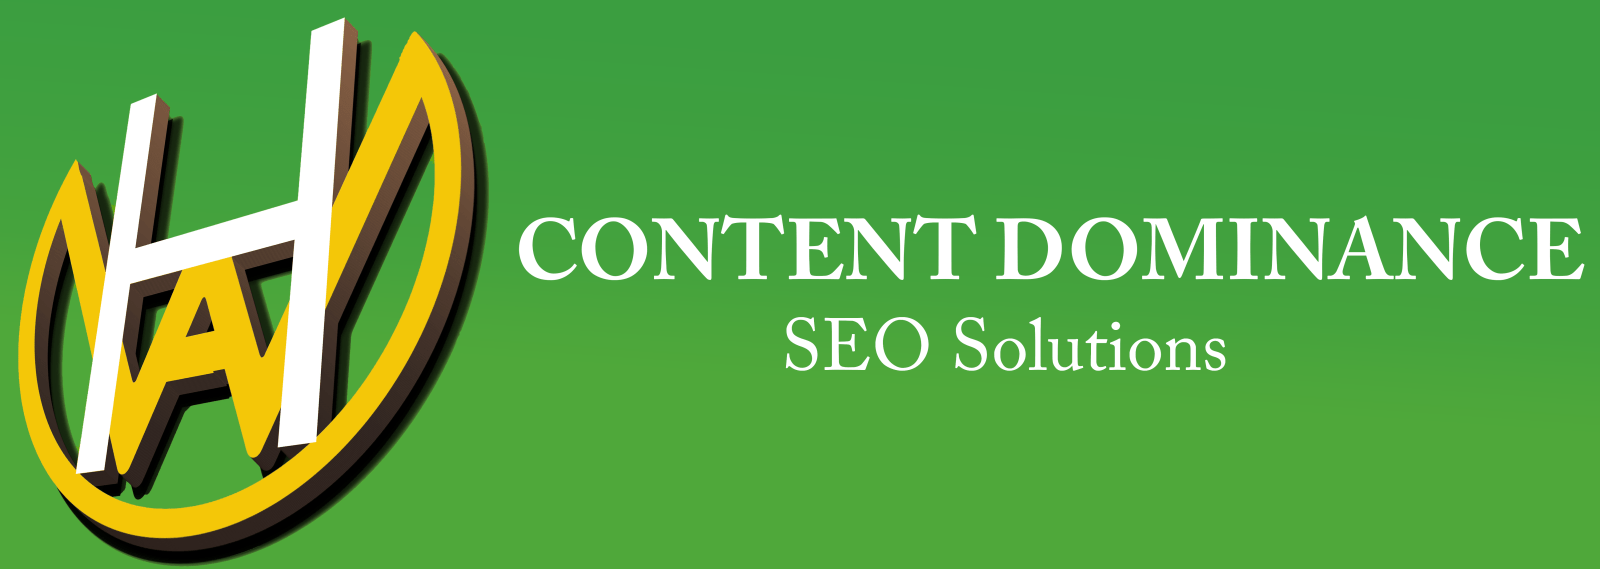 Content Dominance SEO Solutions